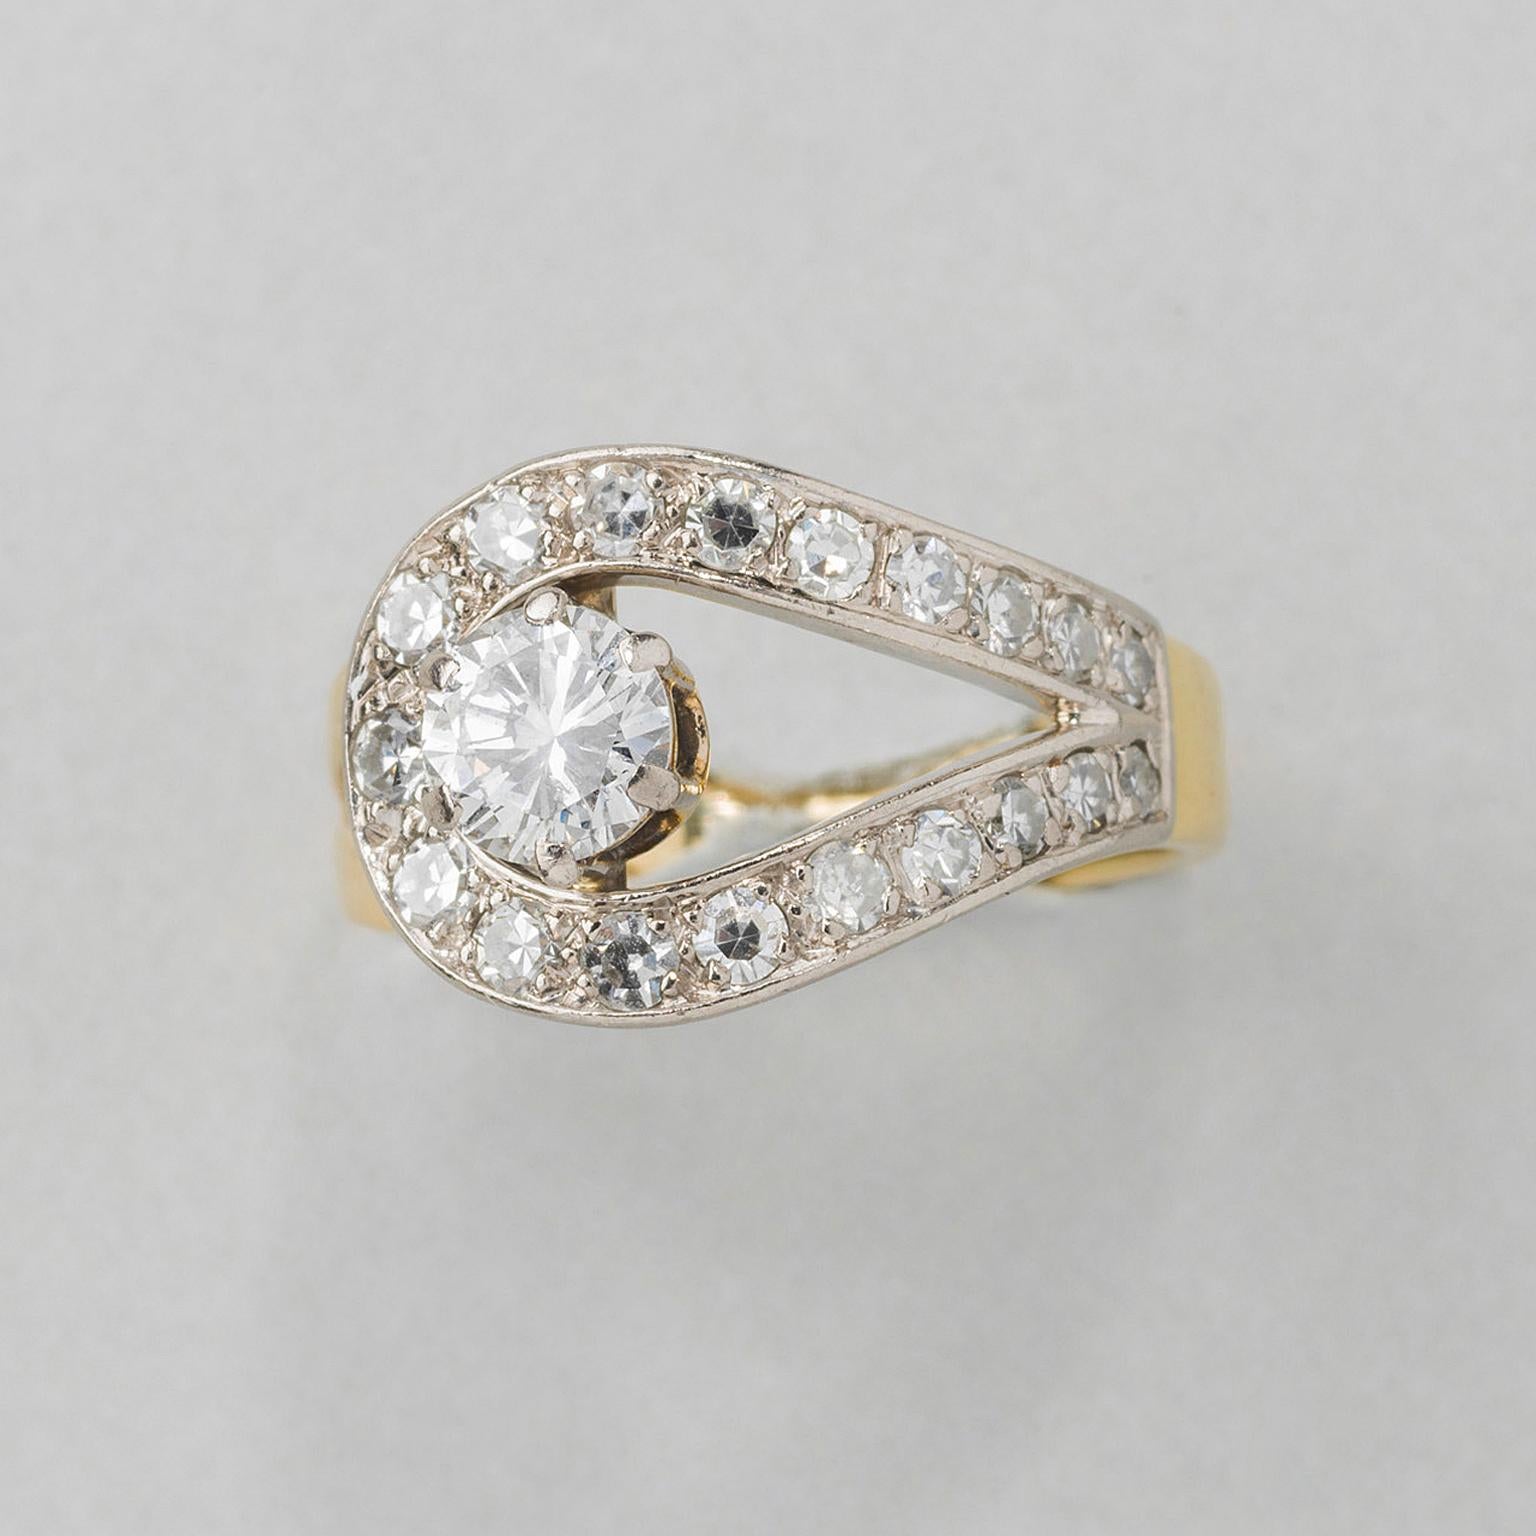 An 18 carat yellow gold ring with a white gold loop set with 19 diamonds (app. 0.76 carat) set in the center with a brilliant cut diamonds (app. 0.53 carat, ans app. 1.29 carat in total).

weight: 6.7 grams
ring size: 16.25 mm / 5.5 US
width: 3 – 12